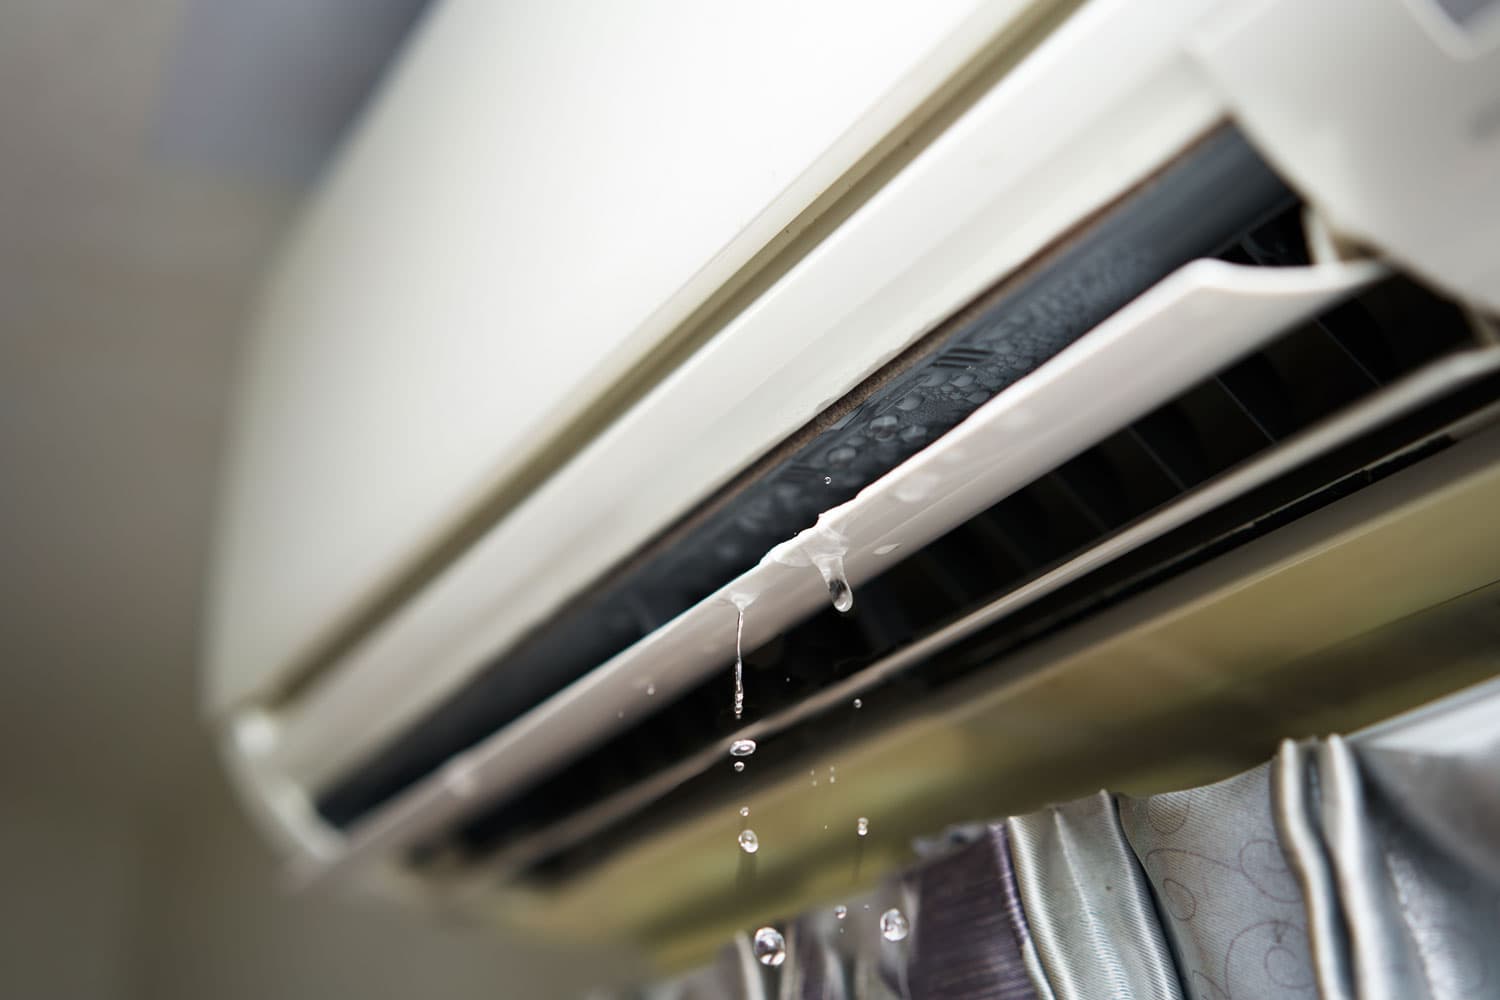 An AC unit dripping water due to high humidity